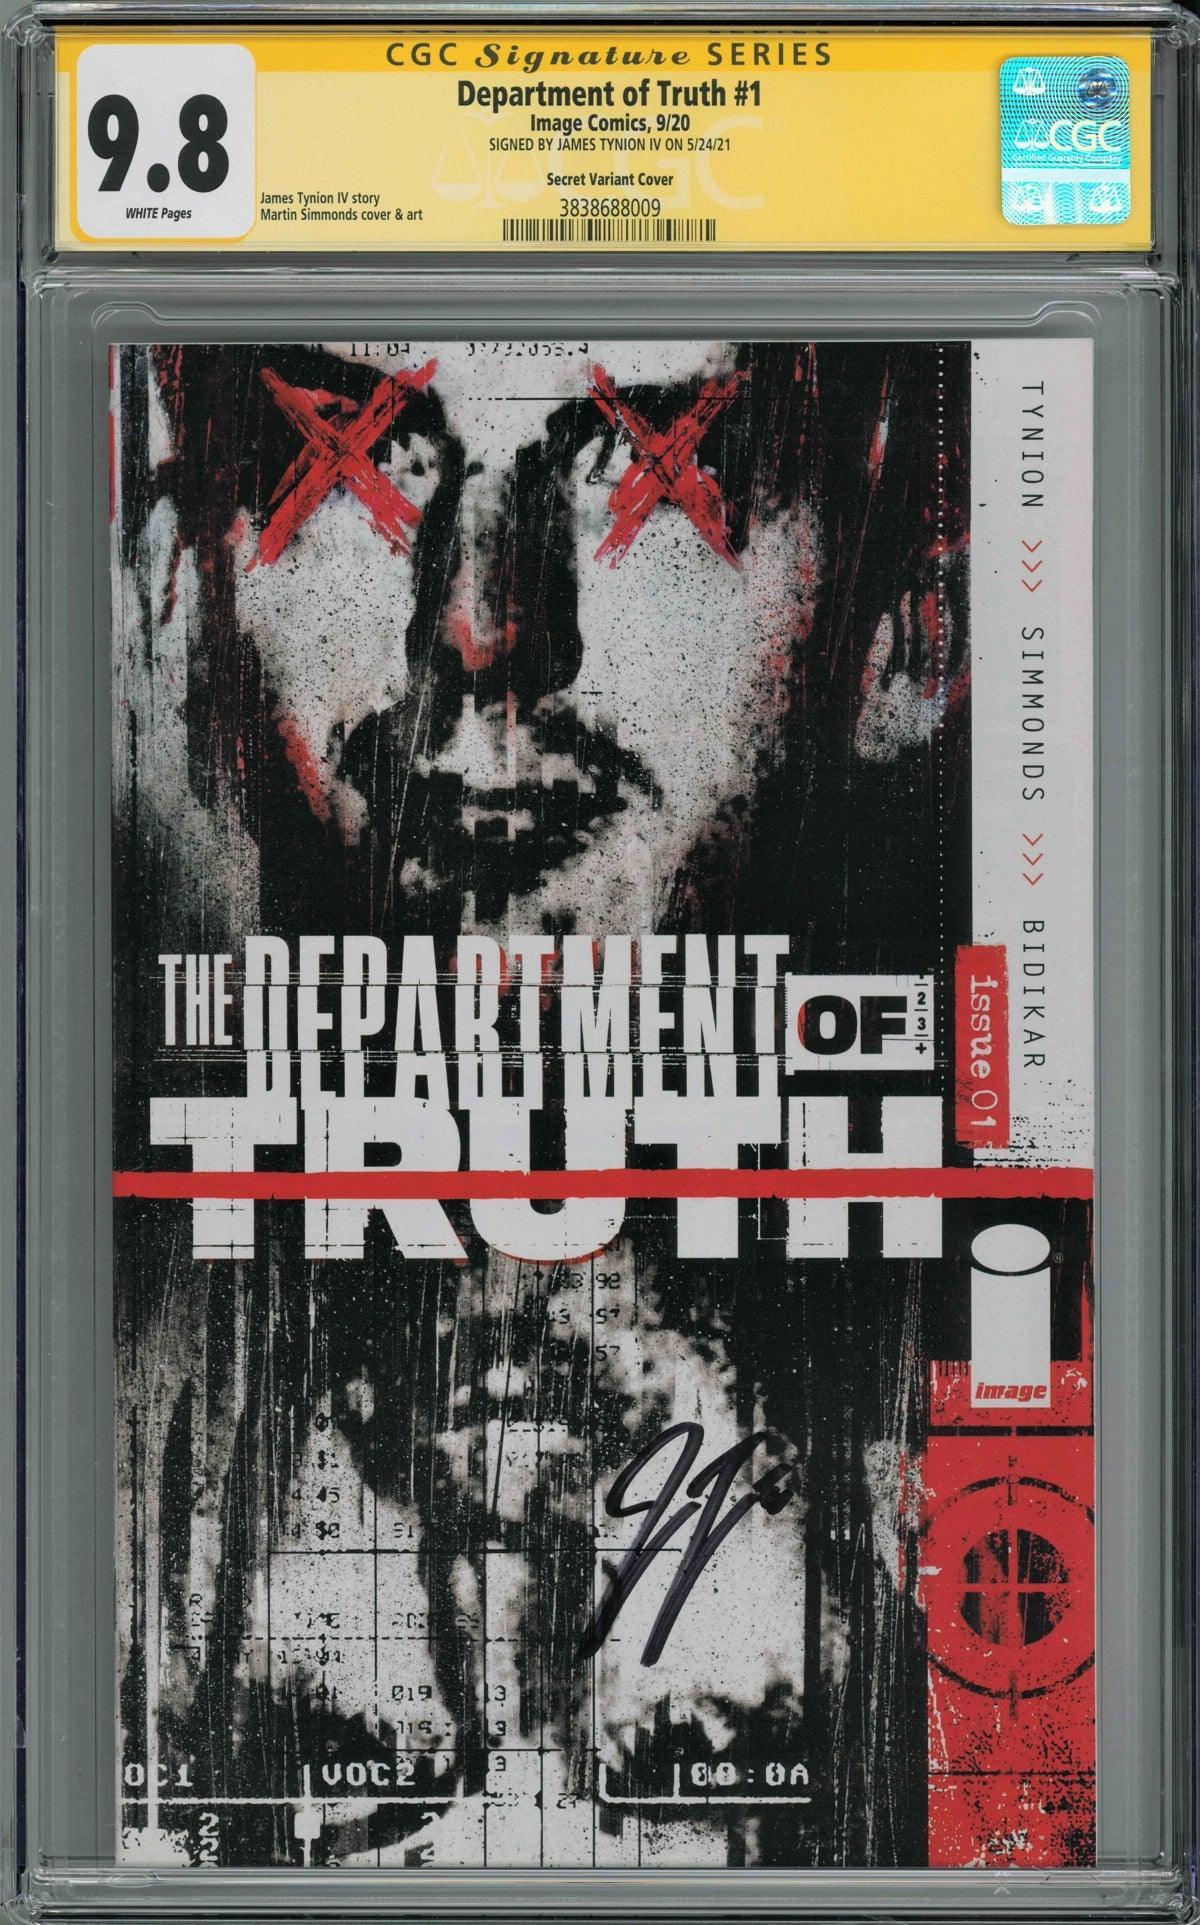 CGC DEPARTMENT OF TRUTH #1 SECRET COVER VARIANT (9.8) SIGNATURE SERIES - SIGNED BY JAMES TYNION IV - Kings Comics